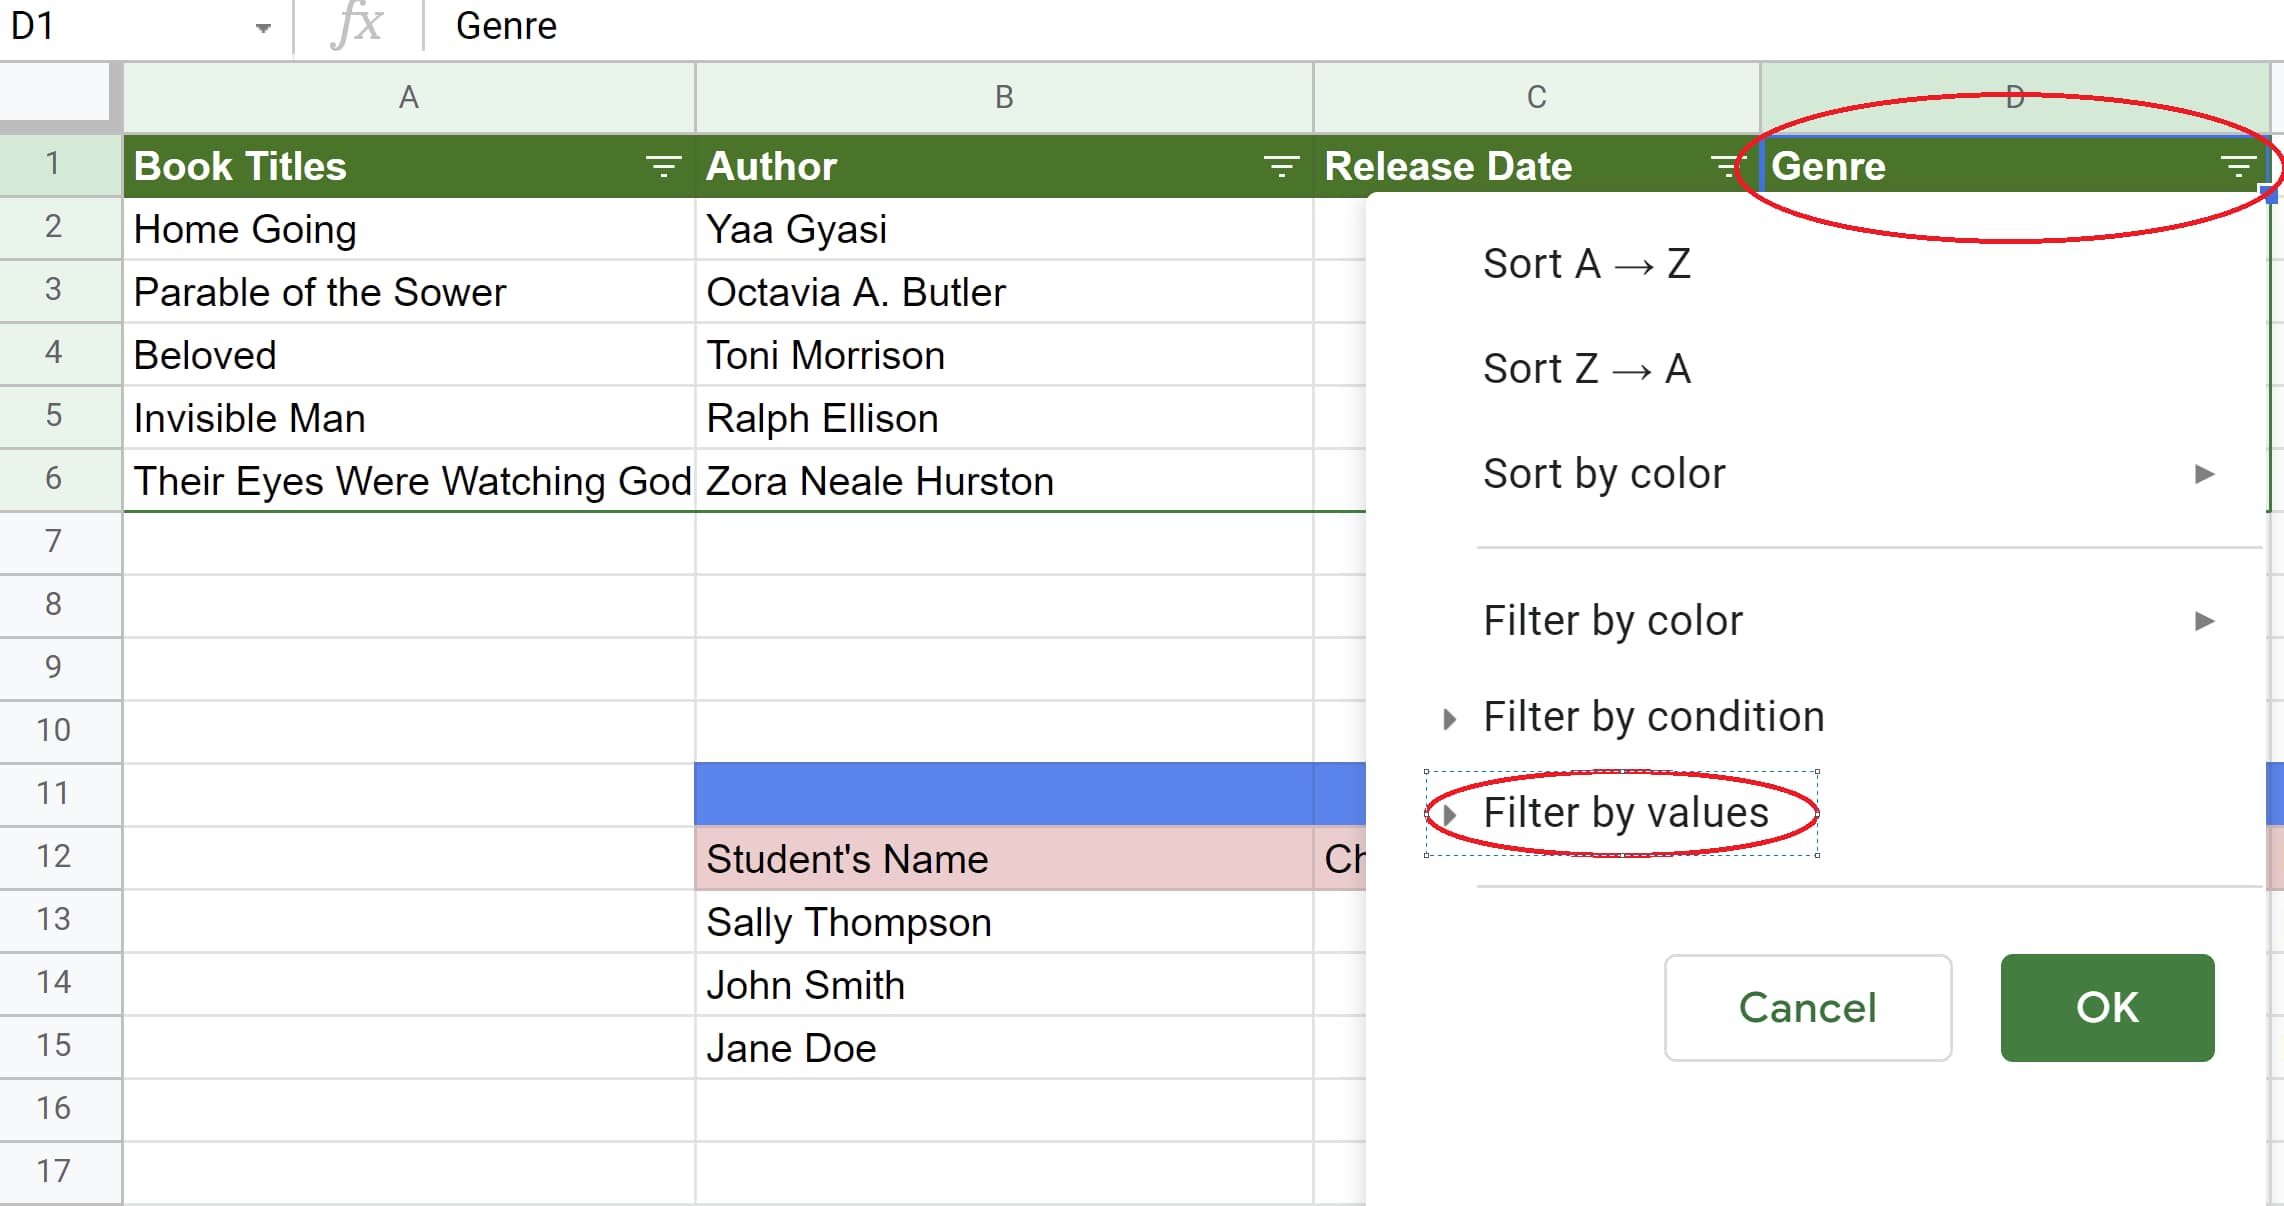 Filter icon in genre column is opened and Filter by values tab is selected in Google Sheets